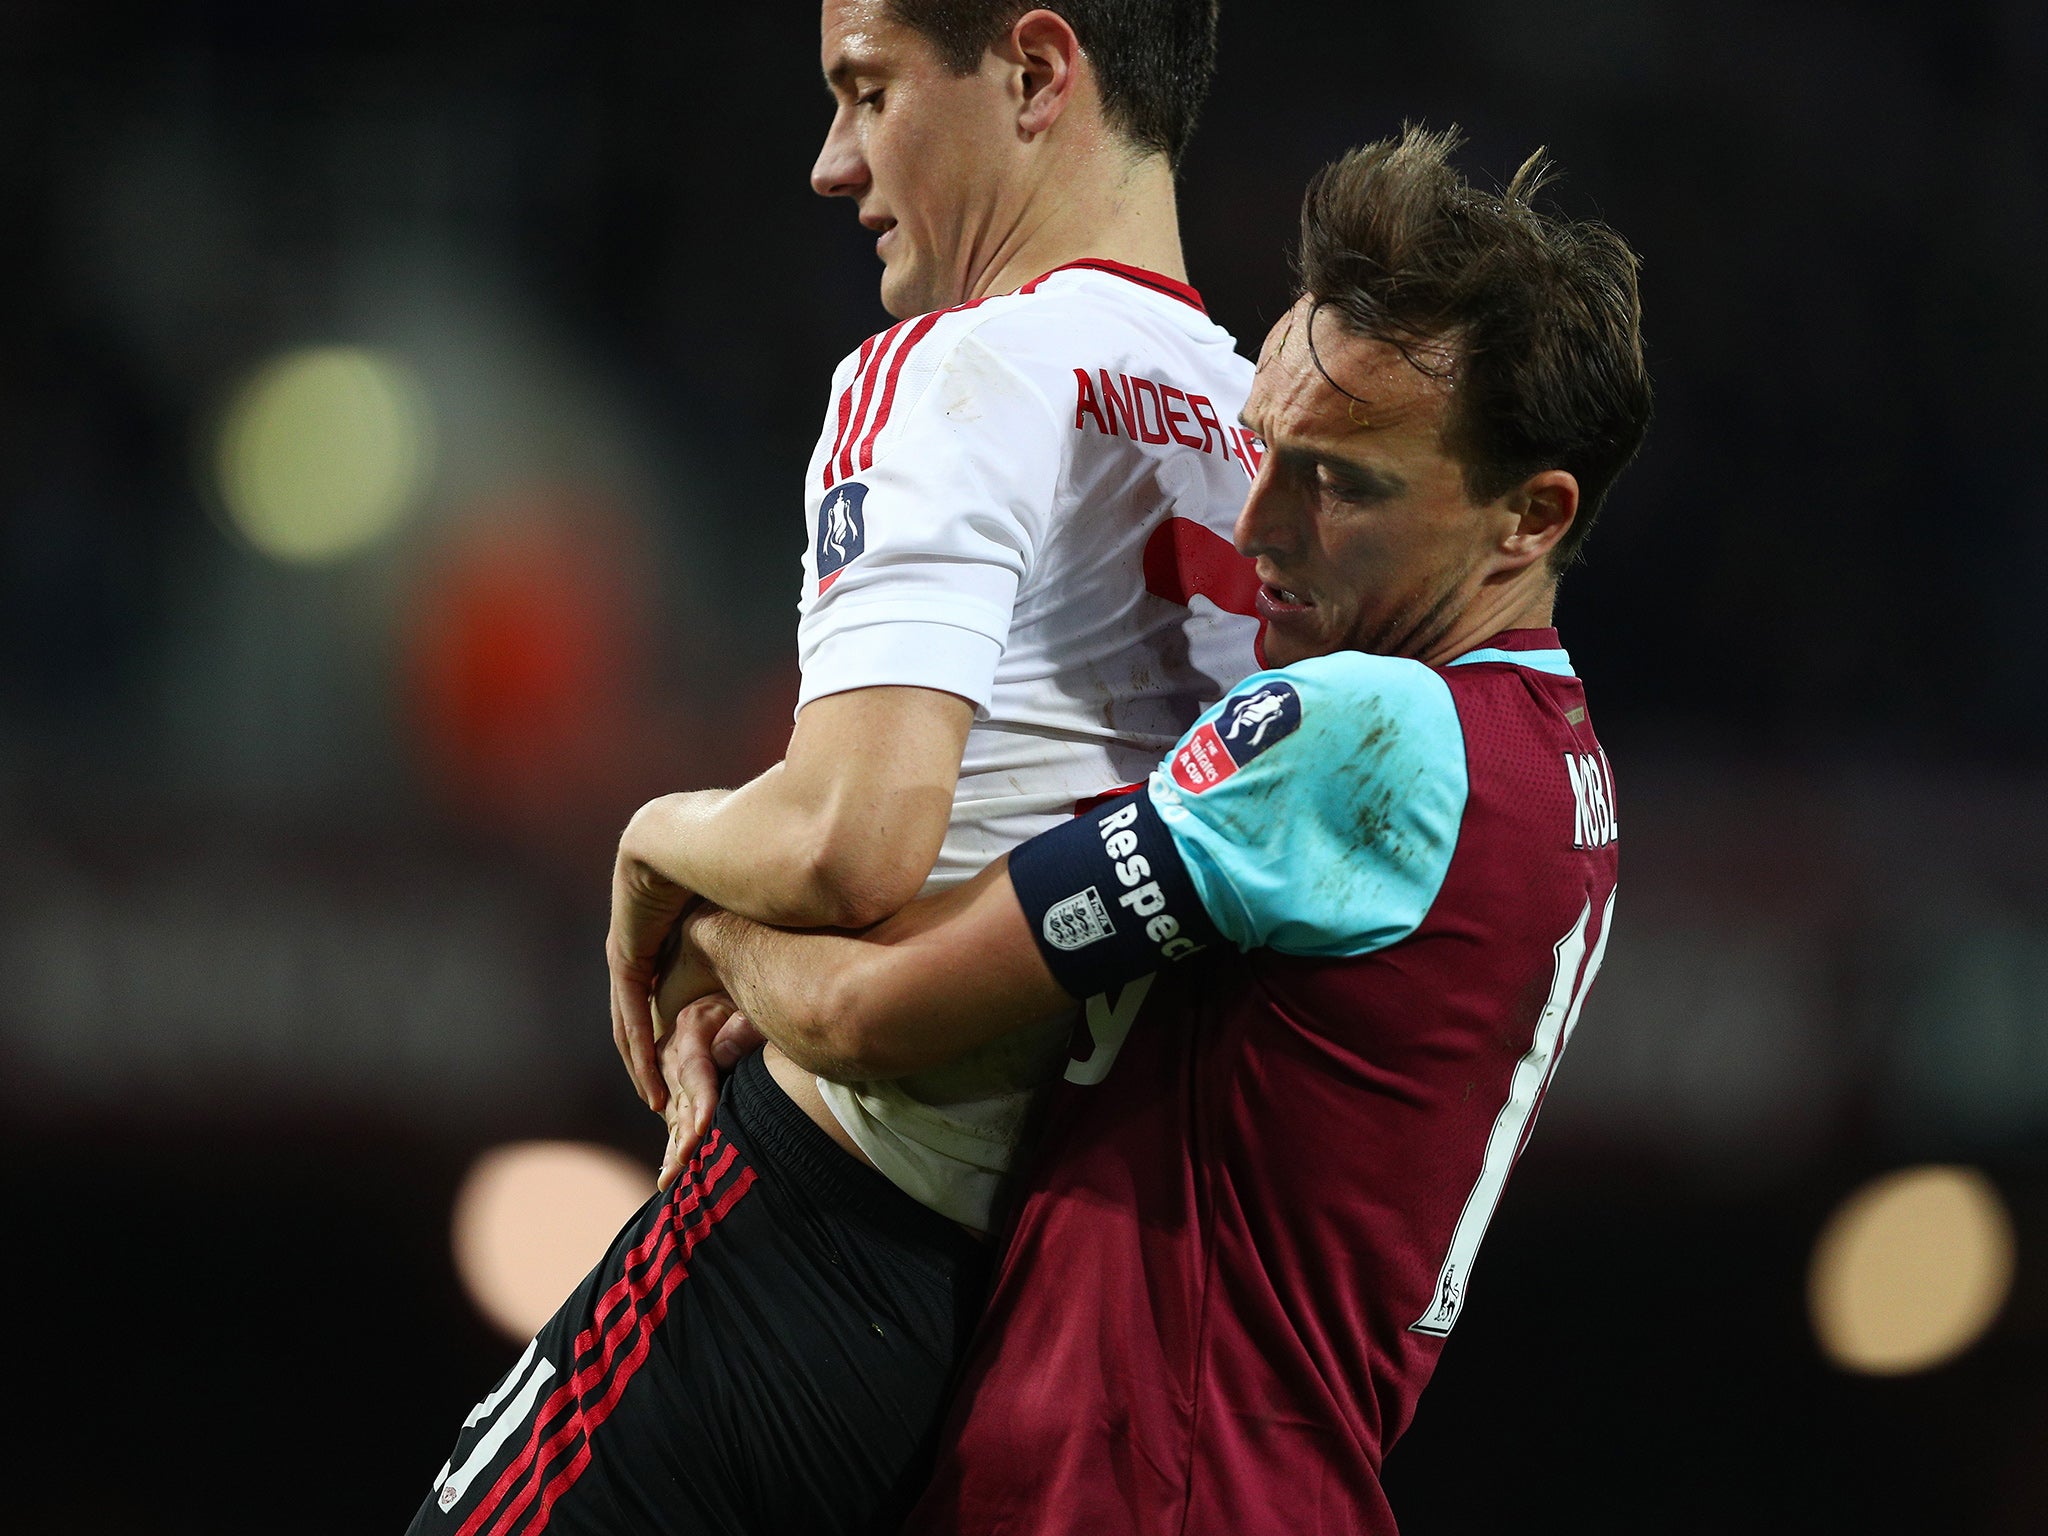 Noble carries the injured Herrera off the field